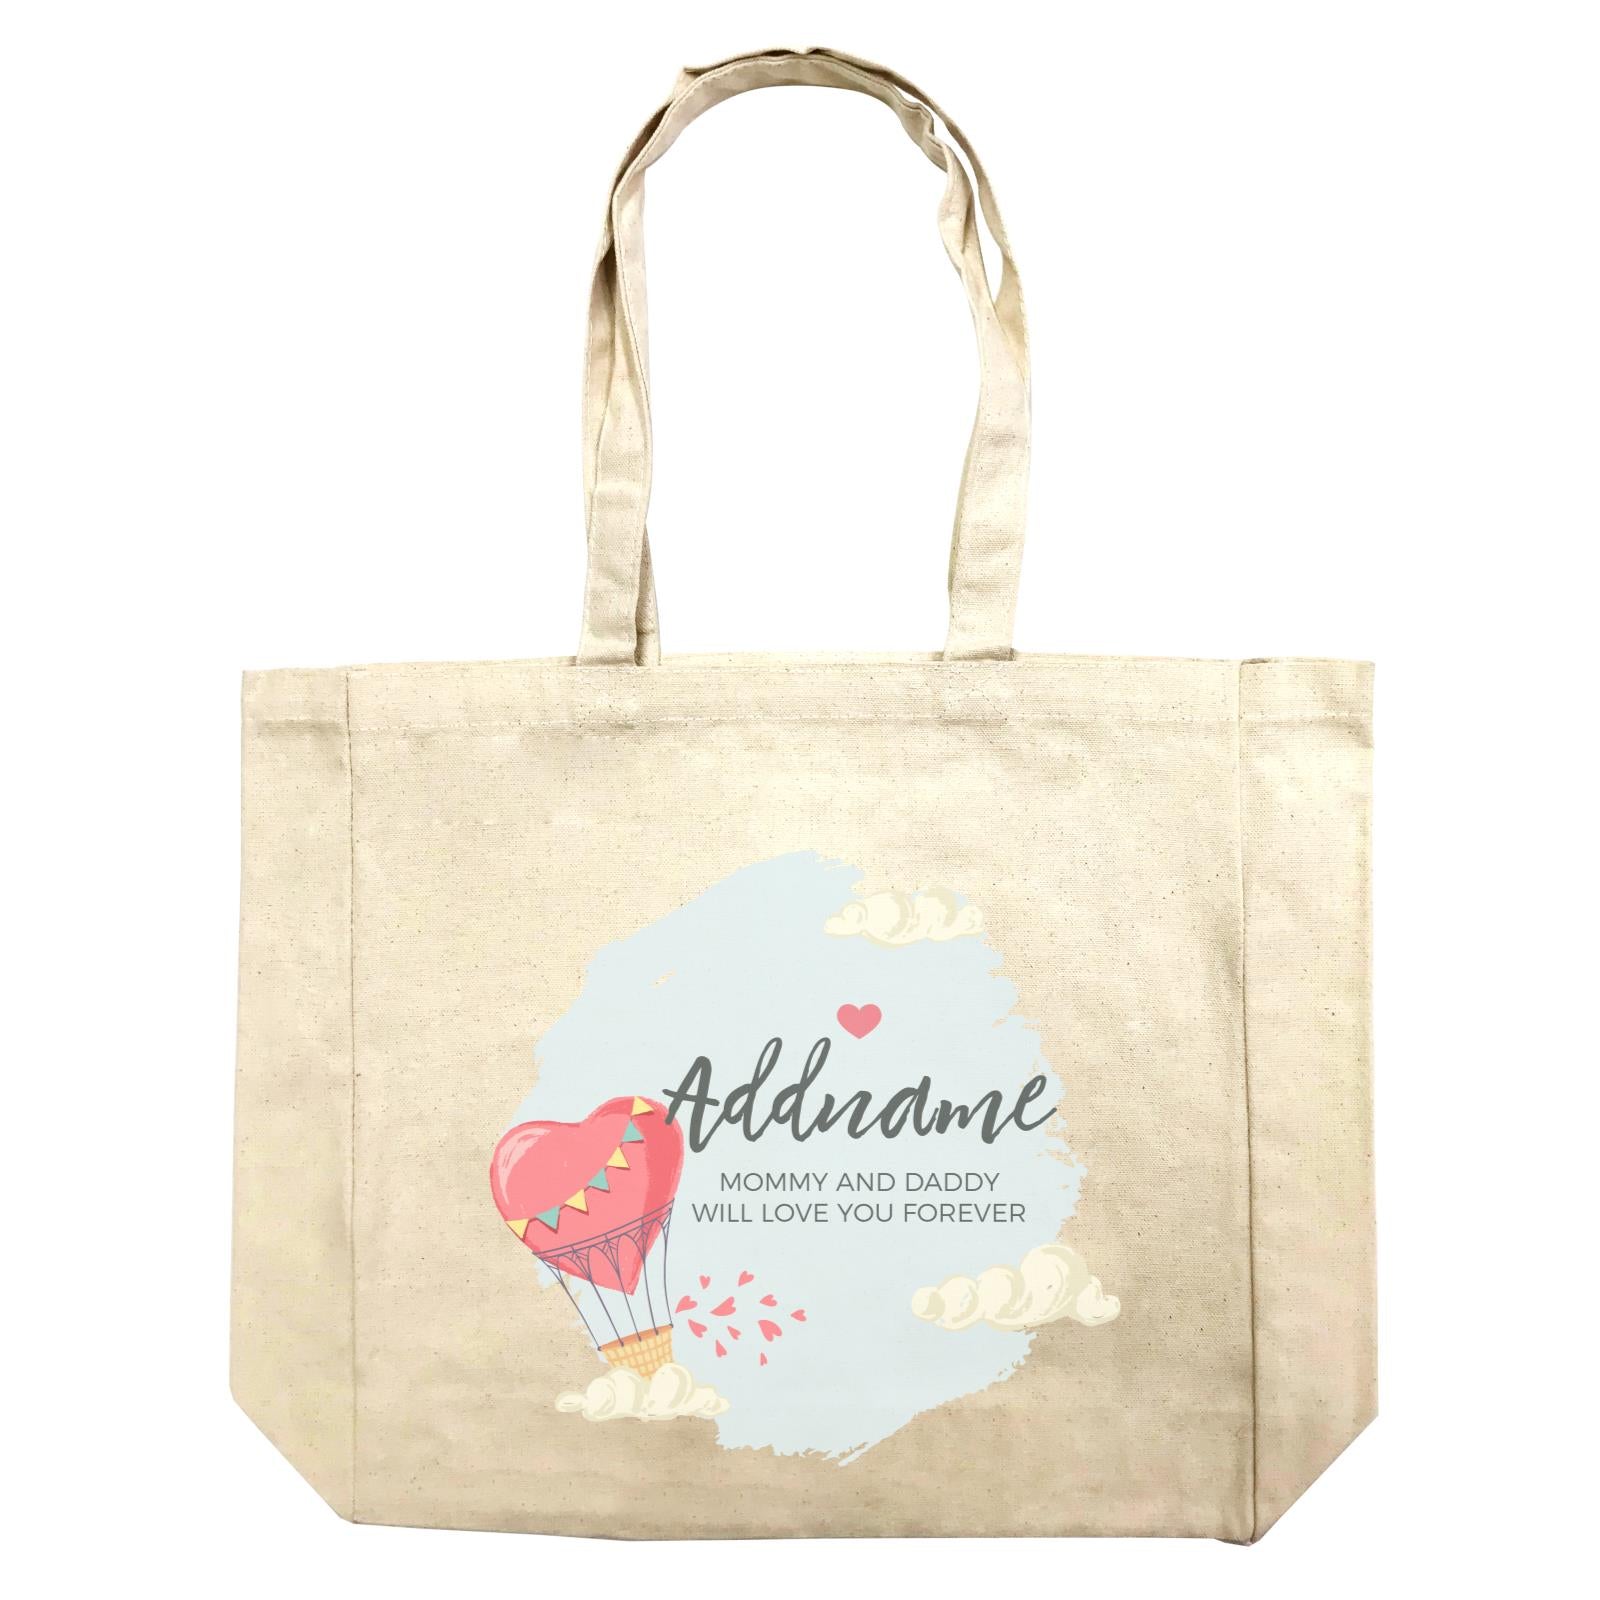 Heart Shaped Hot Air Balloon with Hearts and Clouds Personalizable with Name and Text Shopping Bag